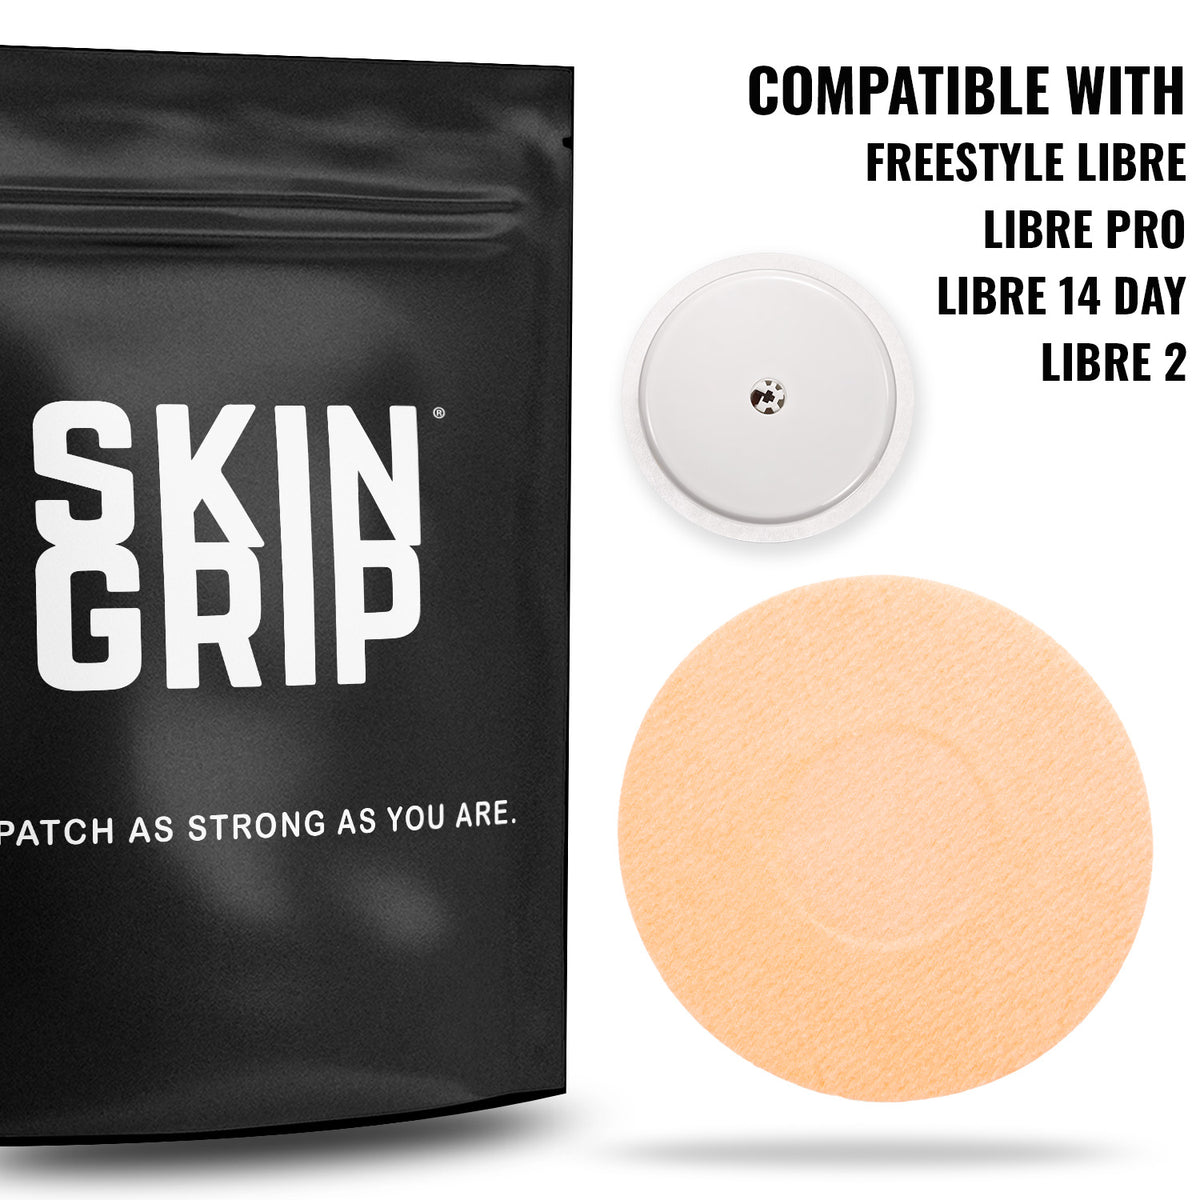 Skin Grip MAX Freestyle Libre Patches